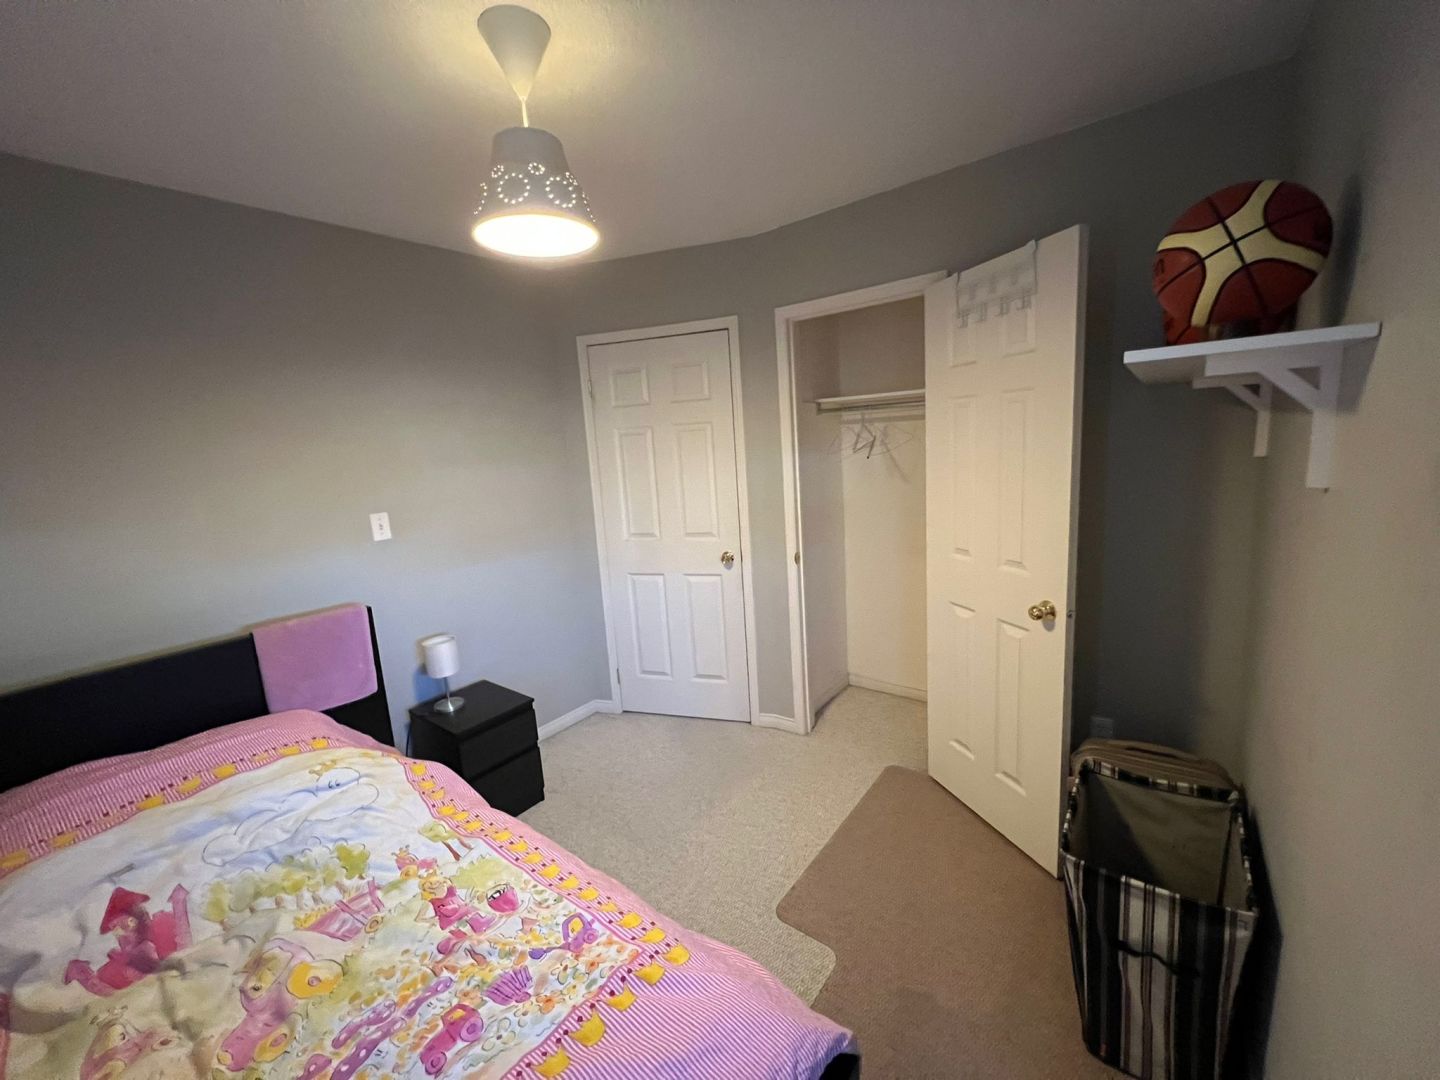 Premium Homestay Room - Torbarrie Rd, North York room for rent 55